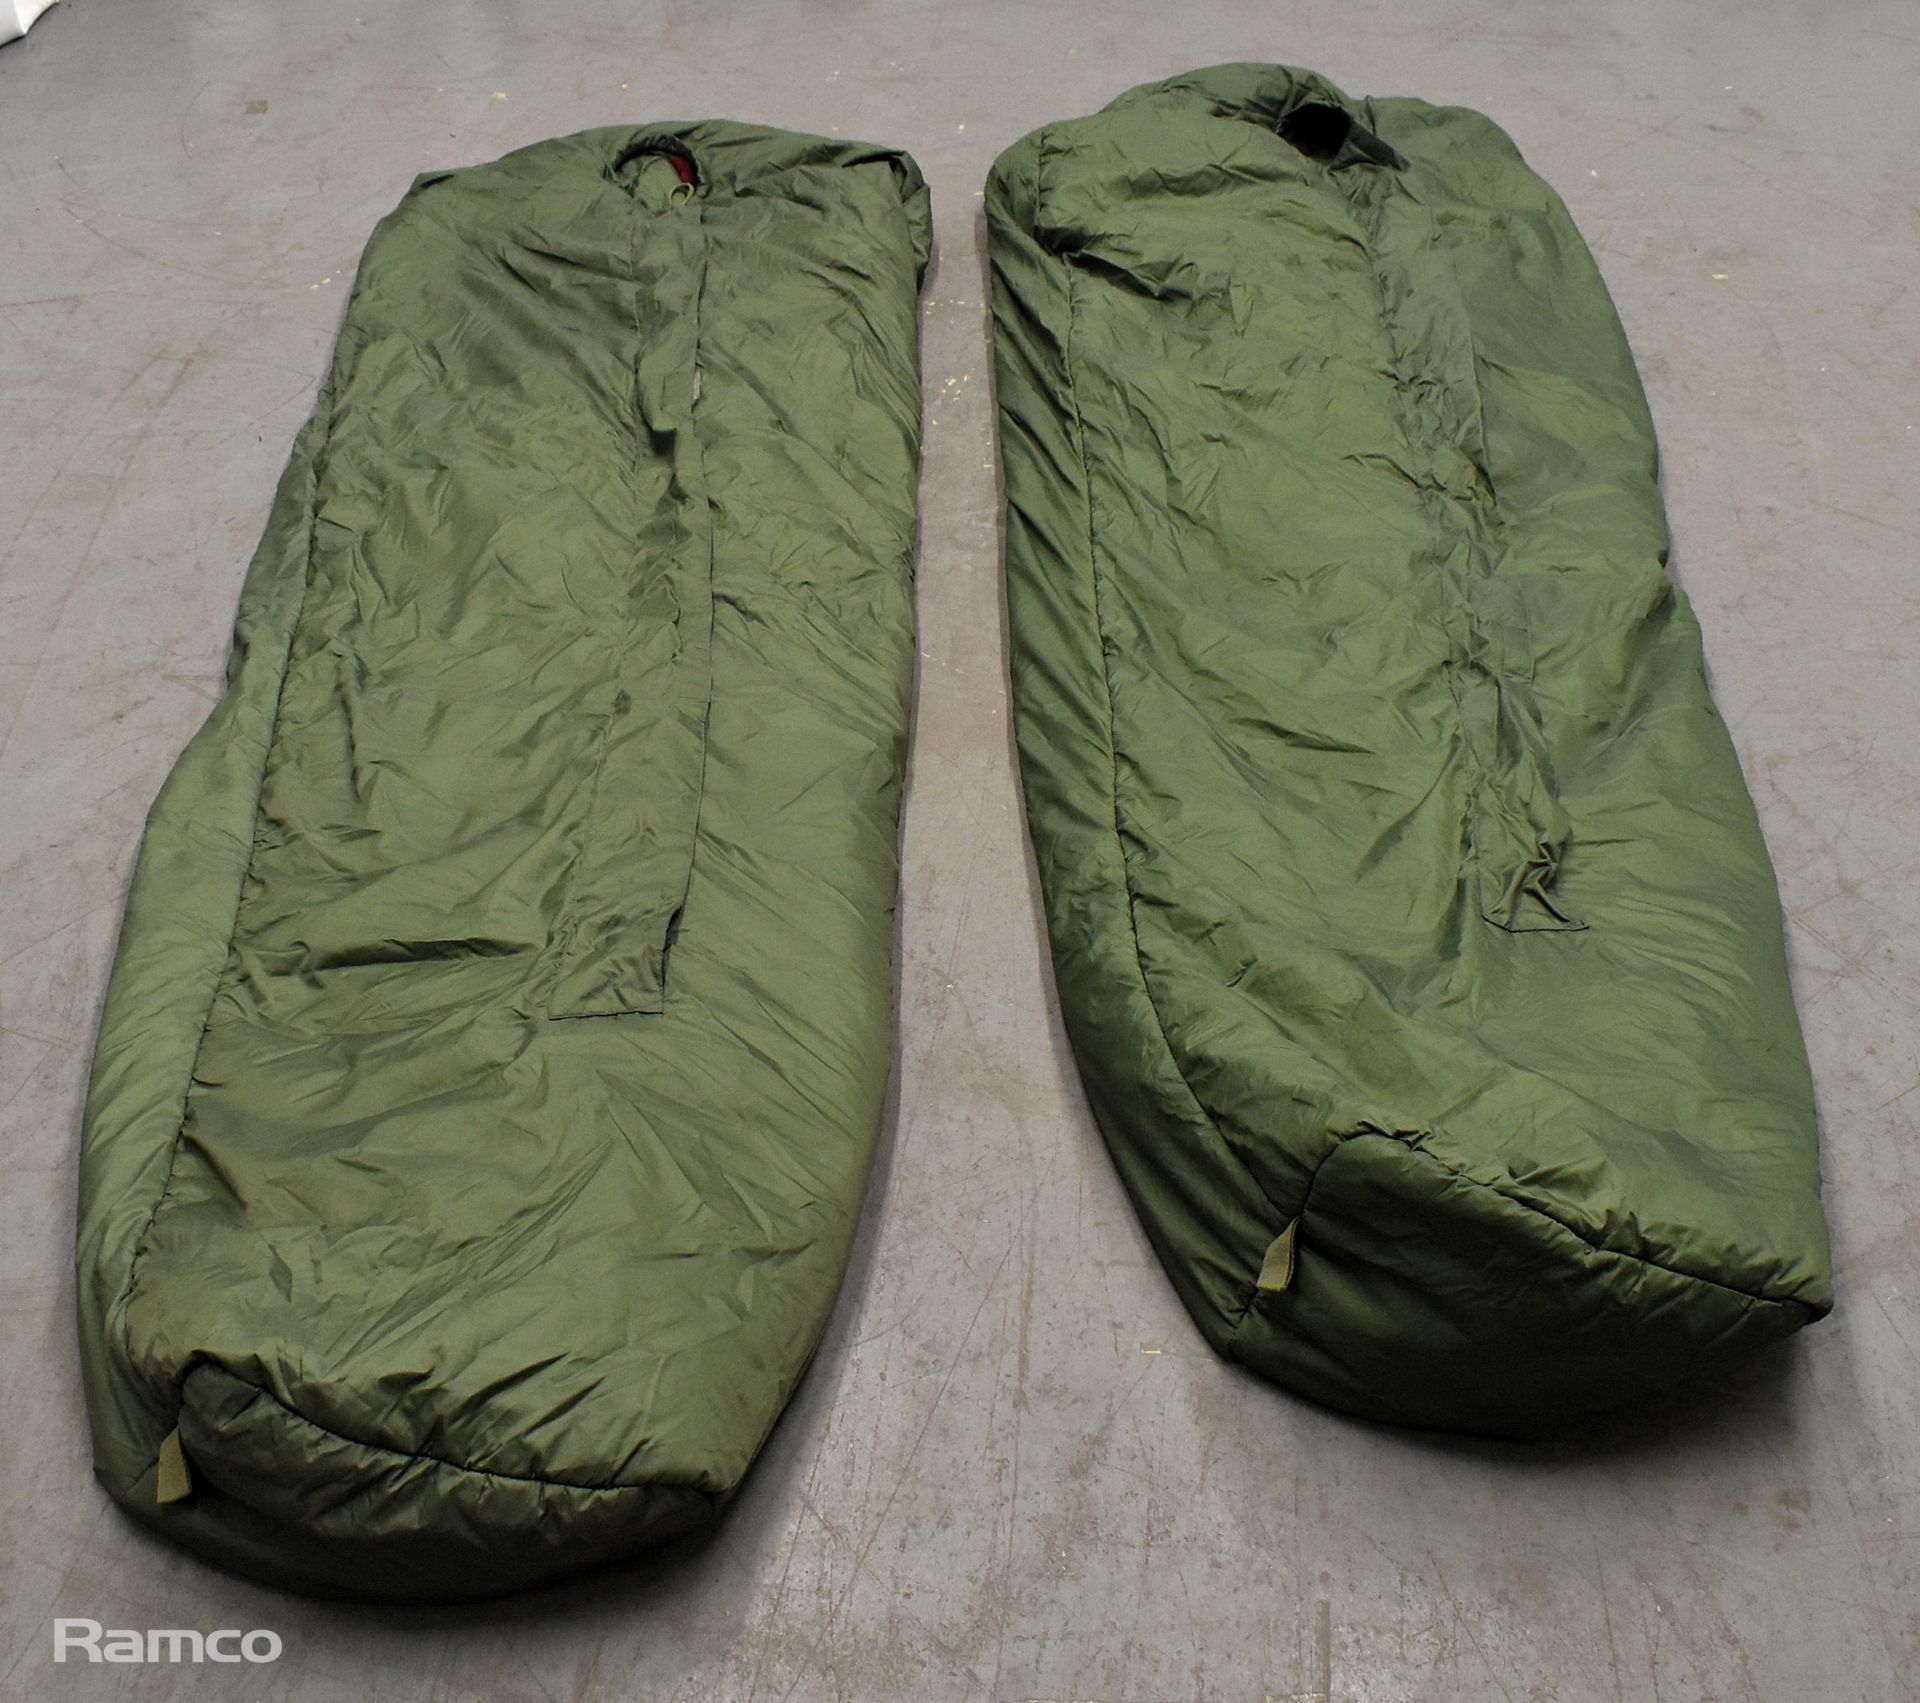 43x Sleeping bags - mixed grades and sizes - Image 4 of 8